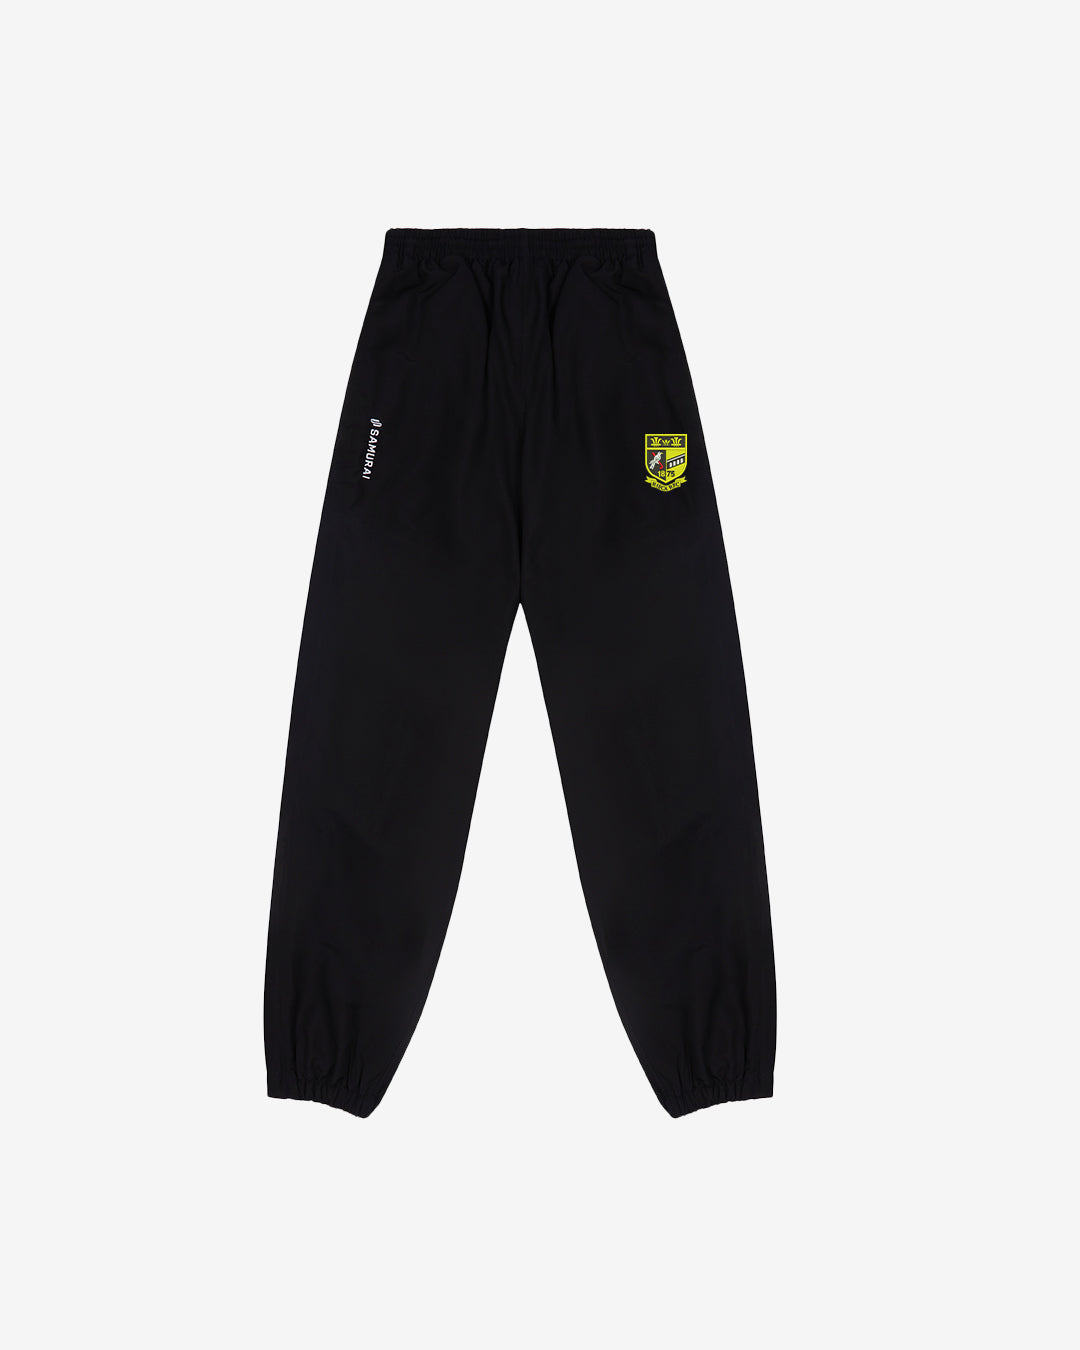 Risca RFC - EP:0104 - Southland Track Pant 2.0 - Black